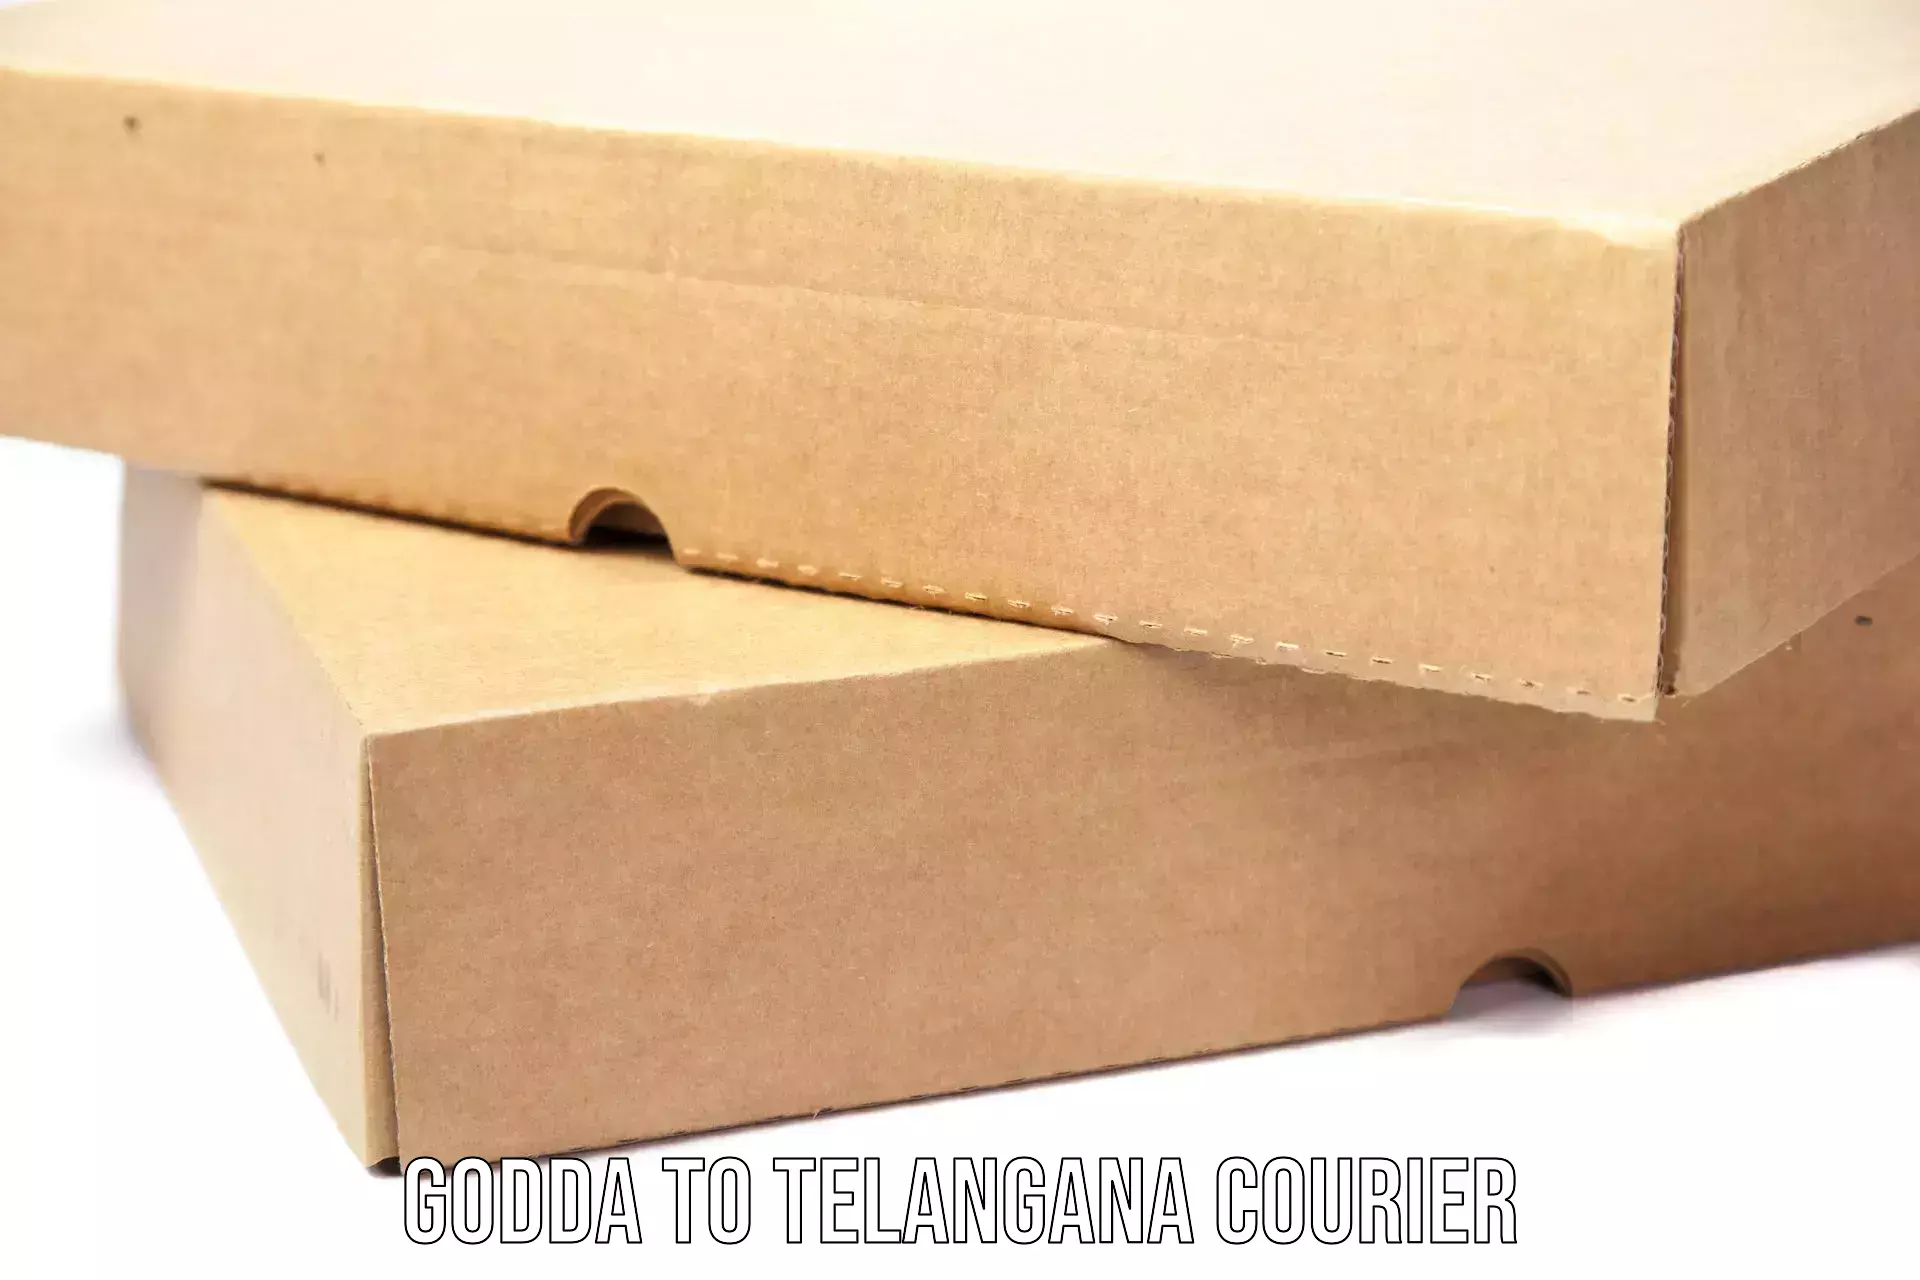 State-of-the-art courier technology Godda to Bijinapalle